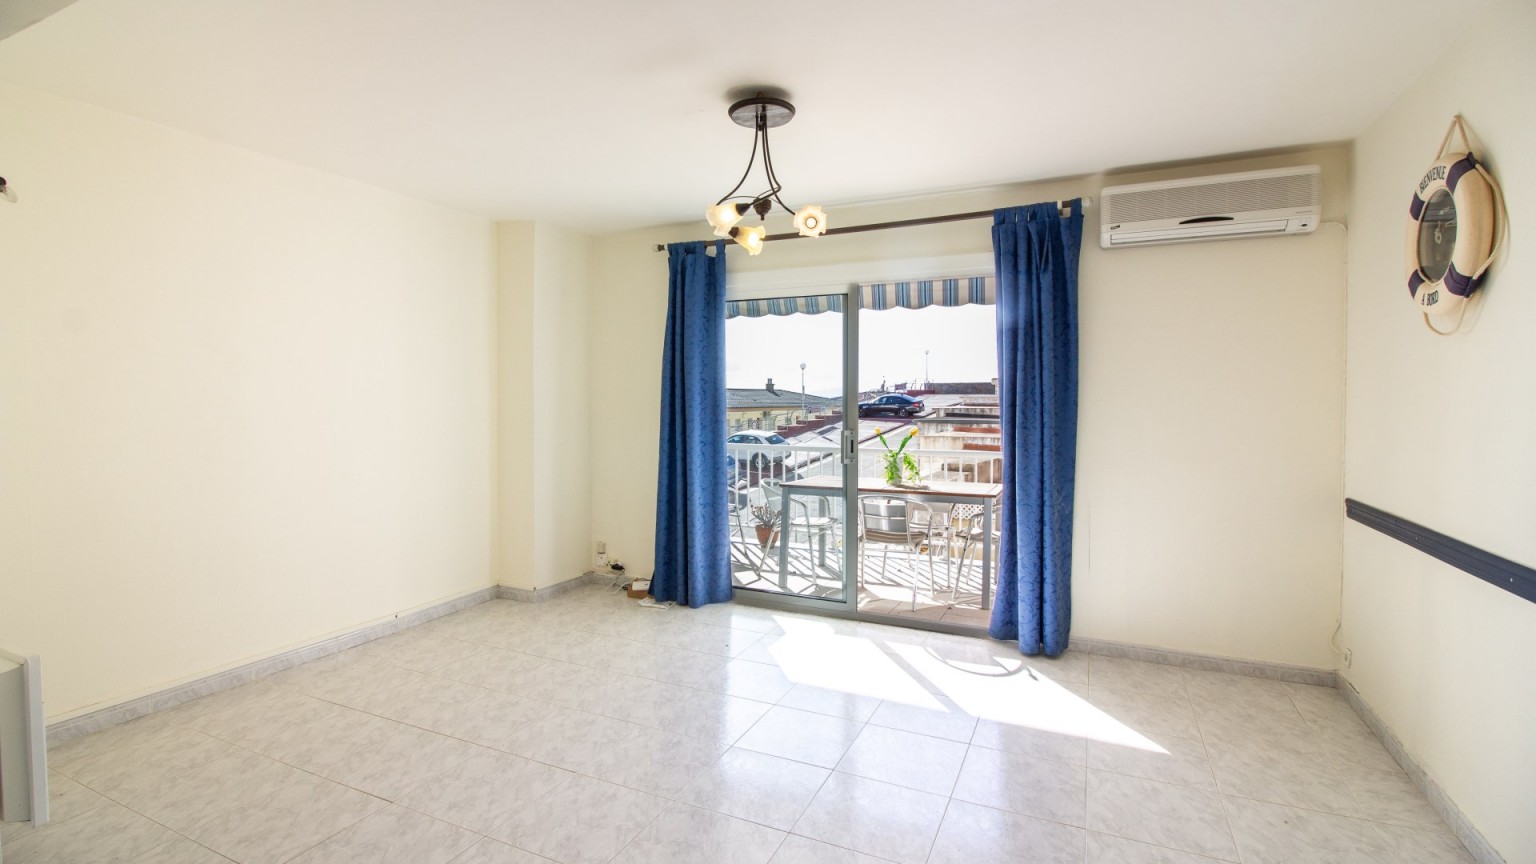 For sale apartment with sea view 2 bedrooms and parking.